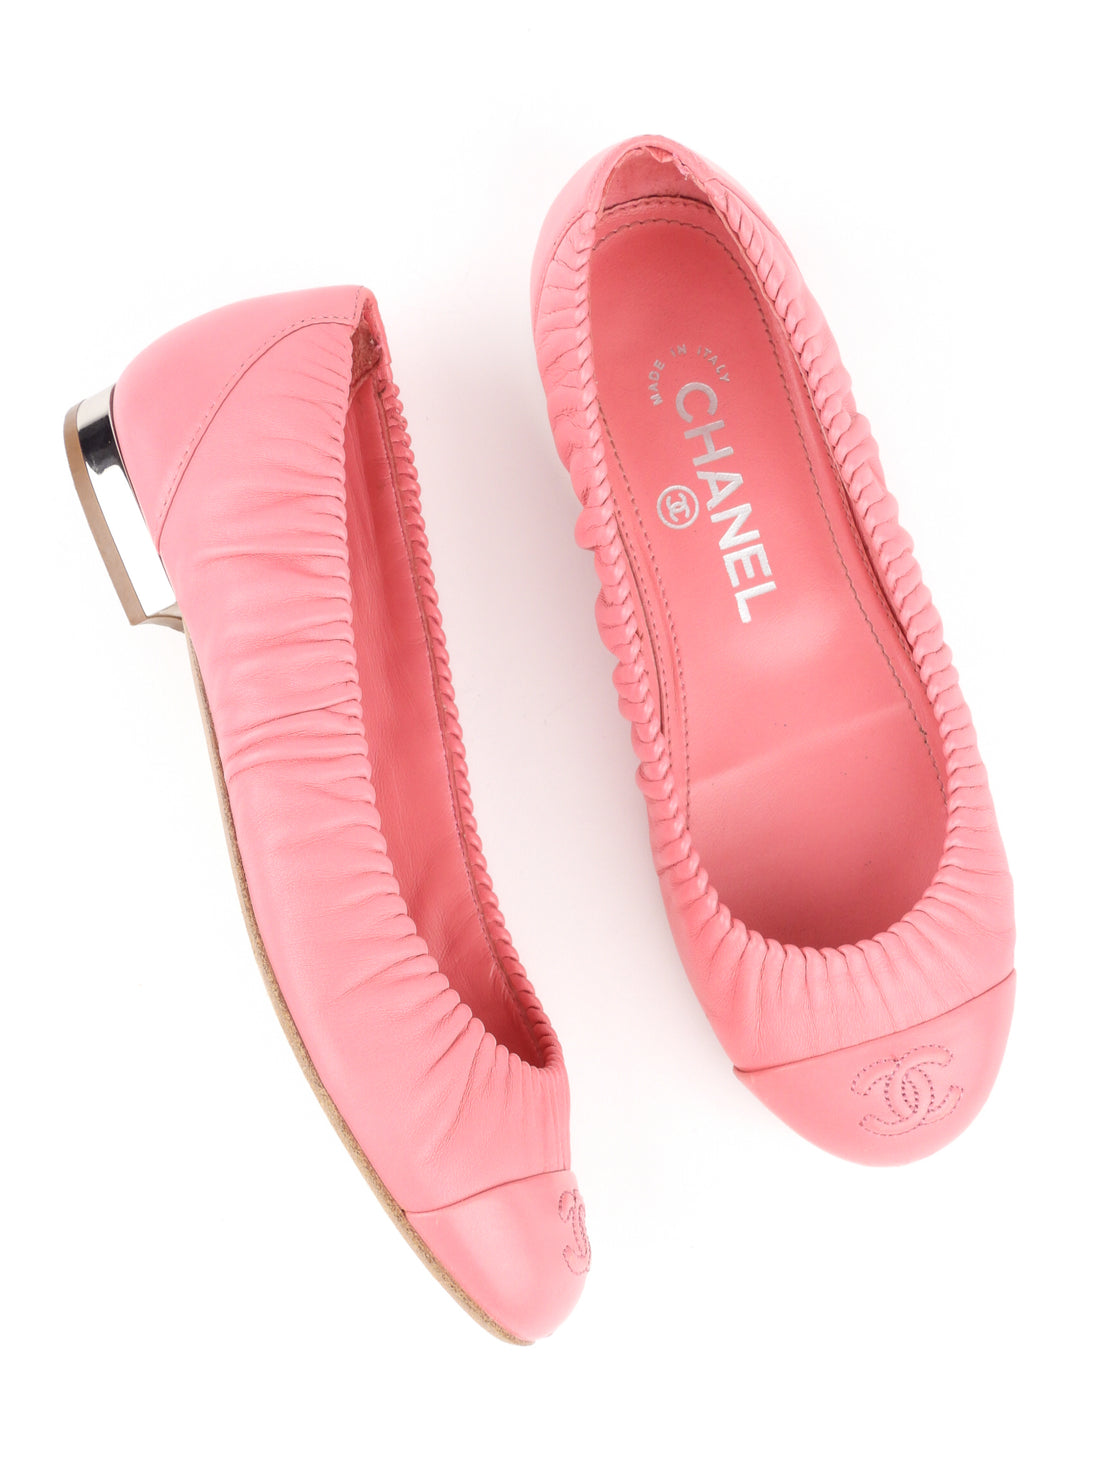 Chanel Pink Ruched Leather Cap Toe Ballet Flats - 36